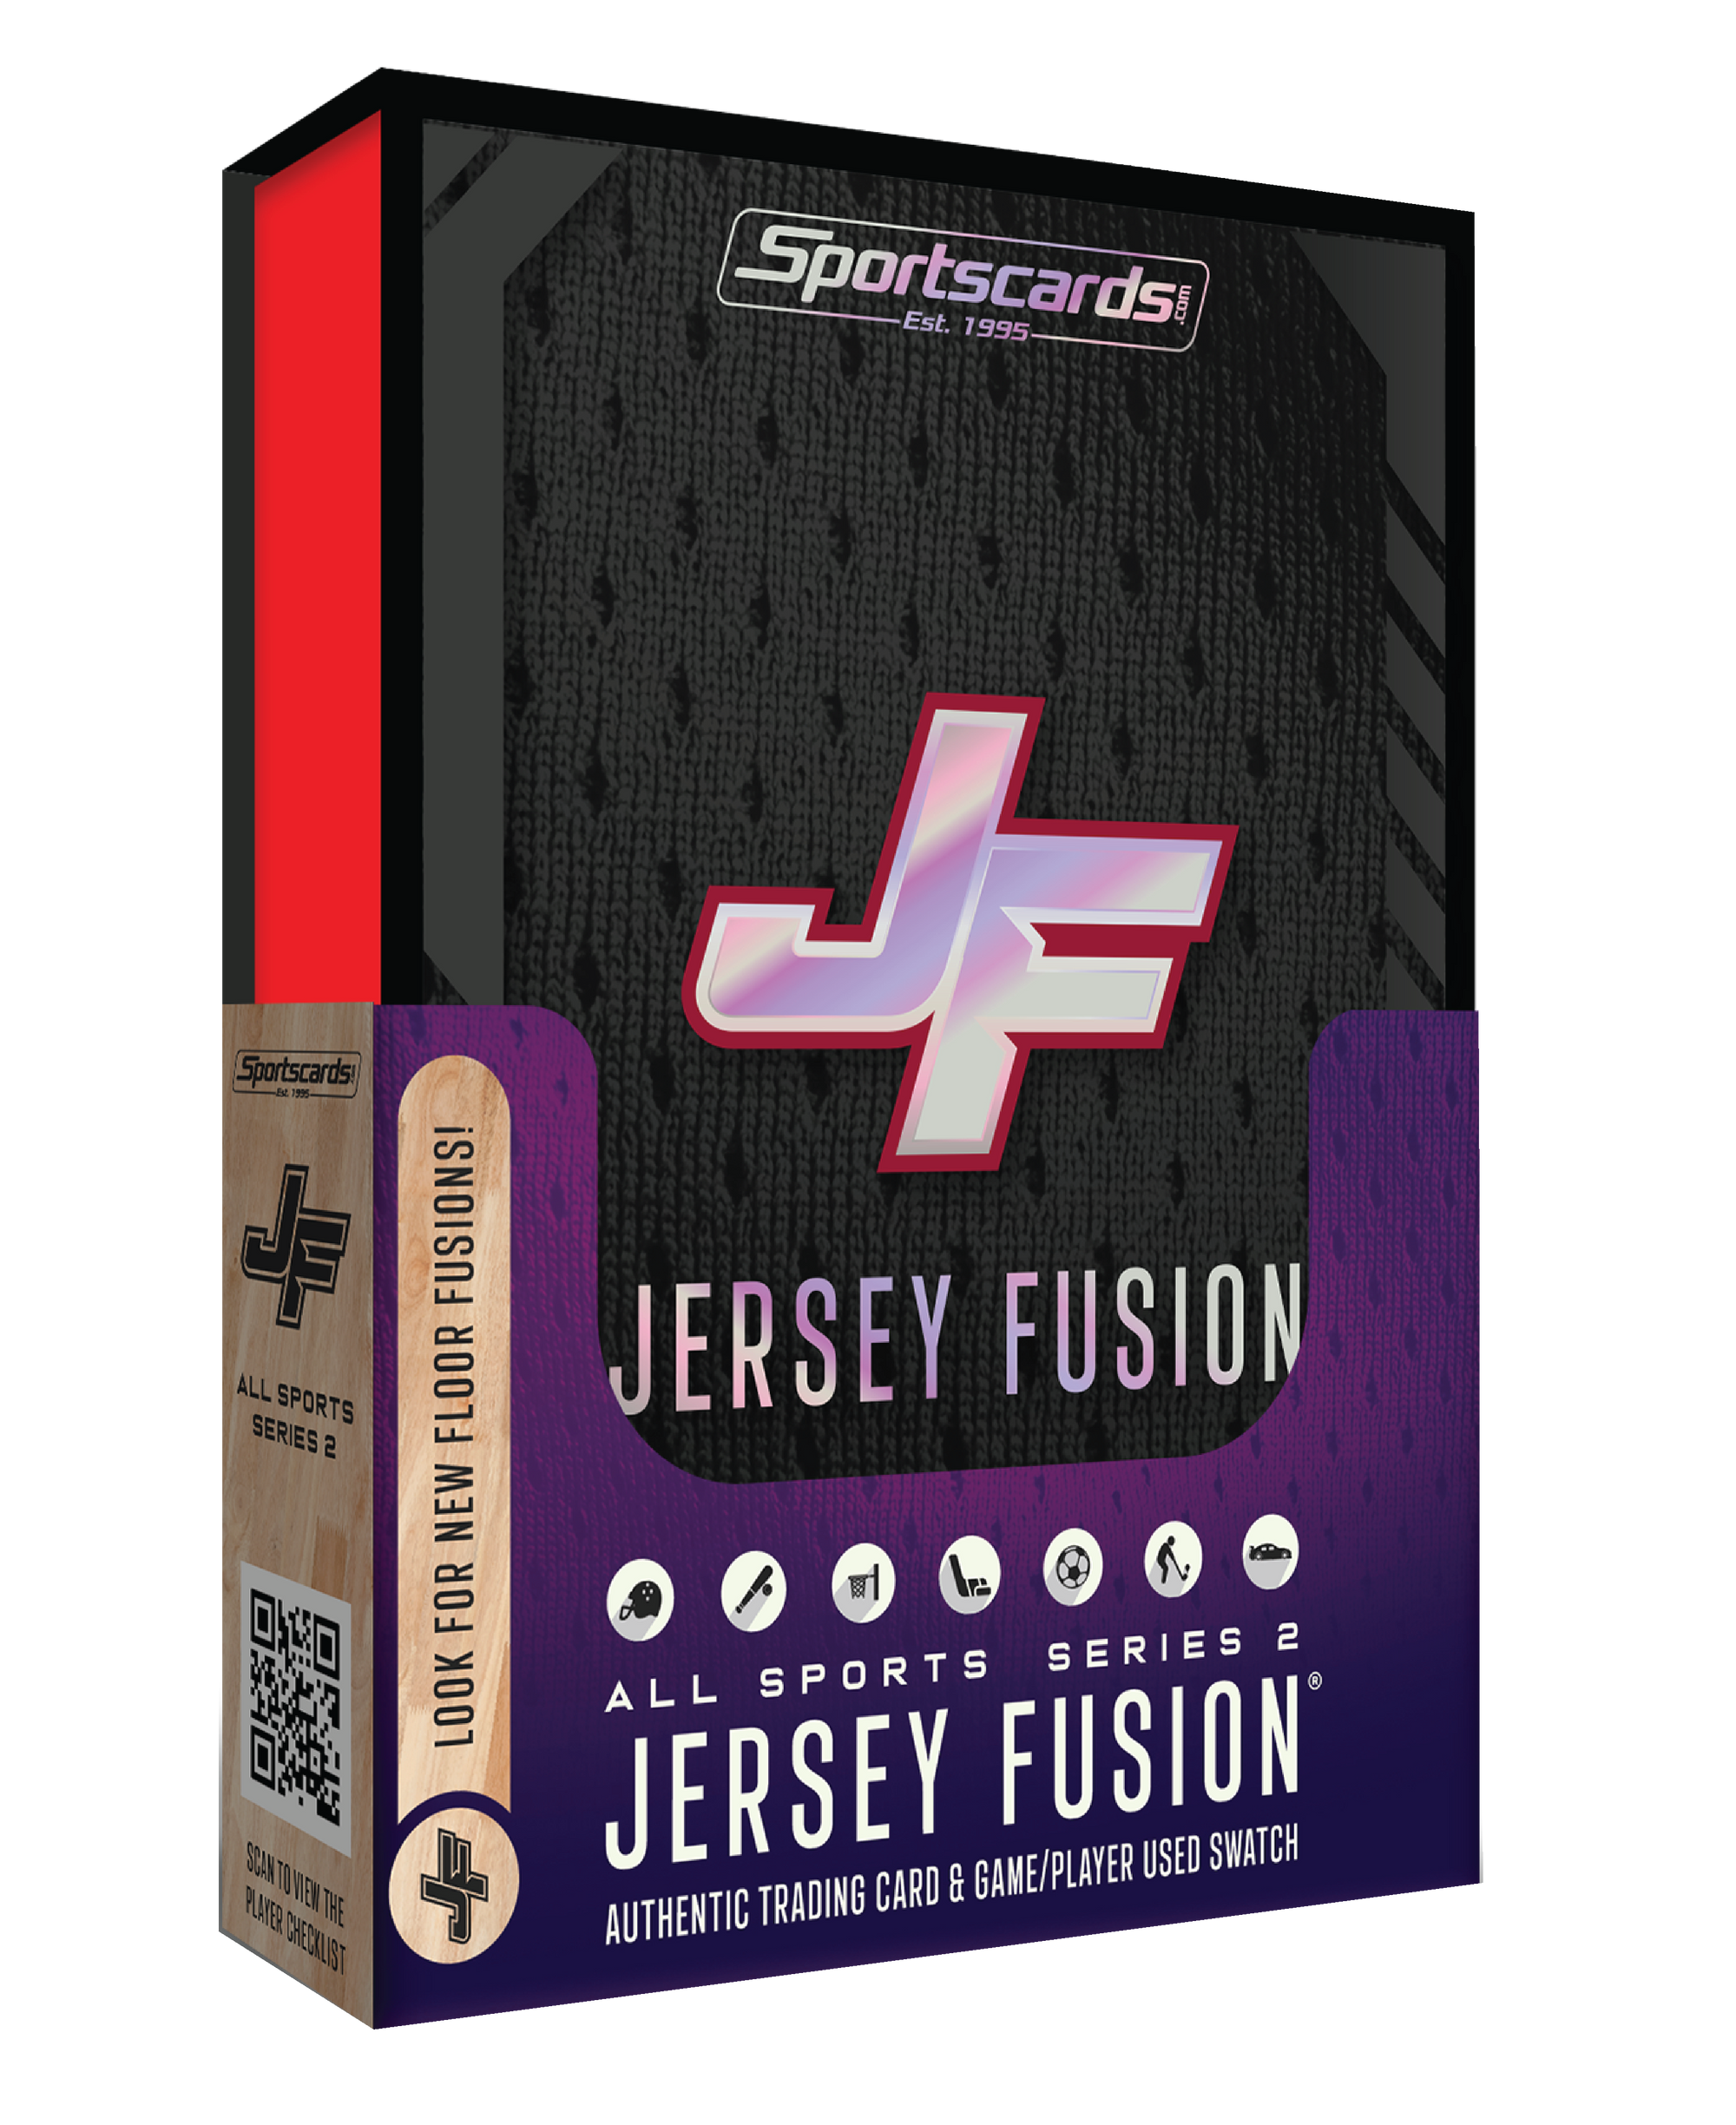 2021 Sportscards.Jersey Fusion Multi Sport Authentic, Original Trading Card  with a Game/Player Worn Swatch or Patch